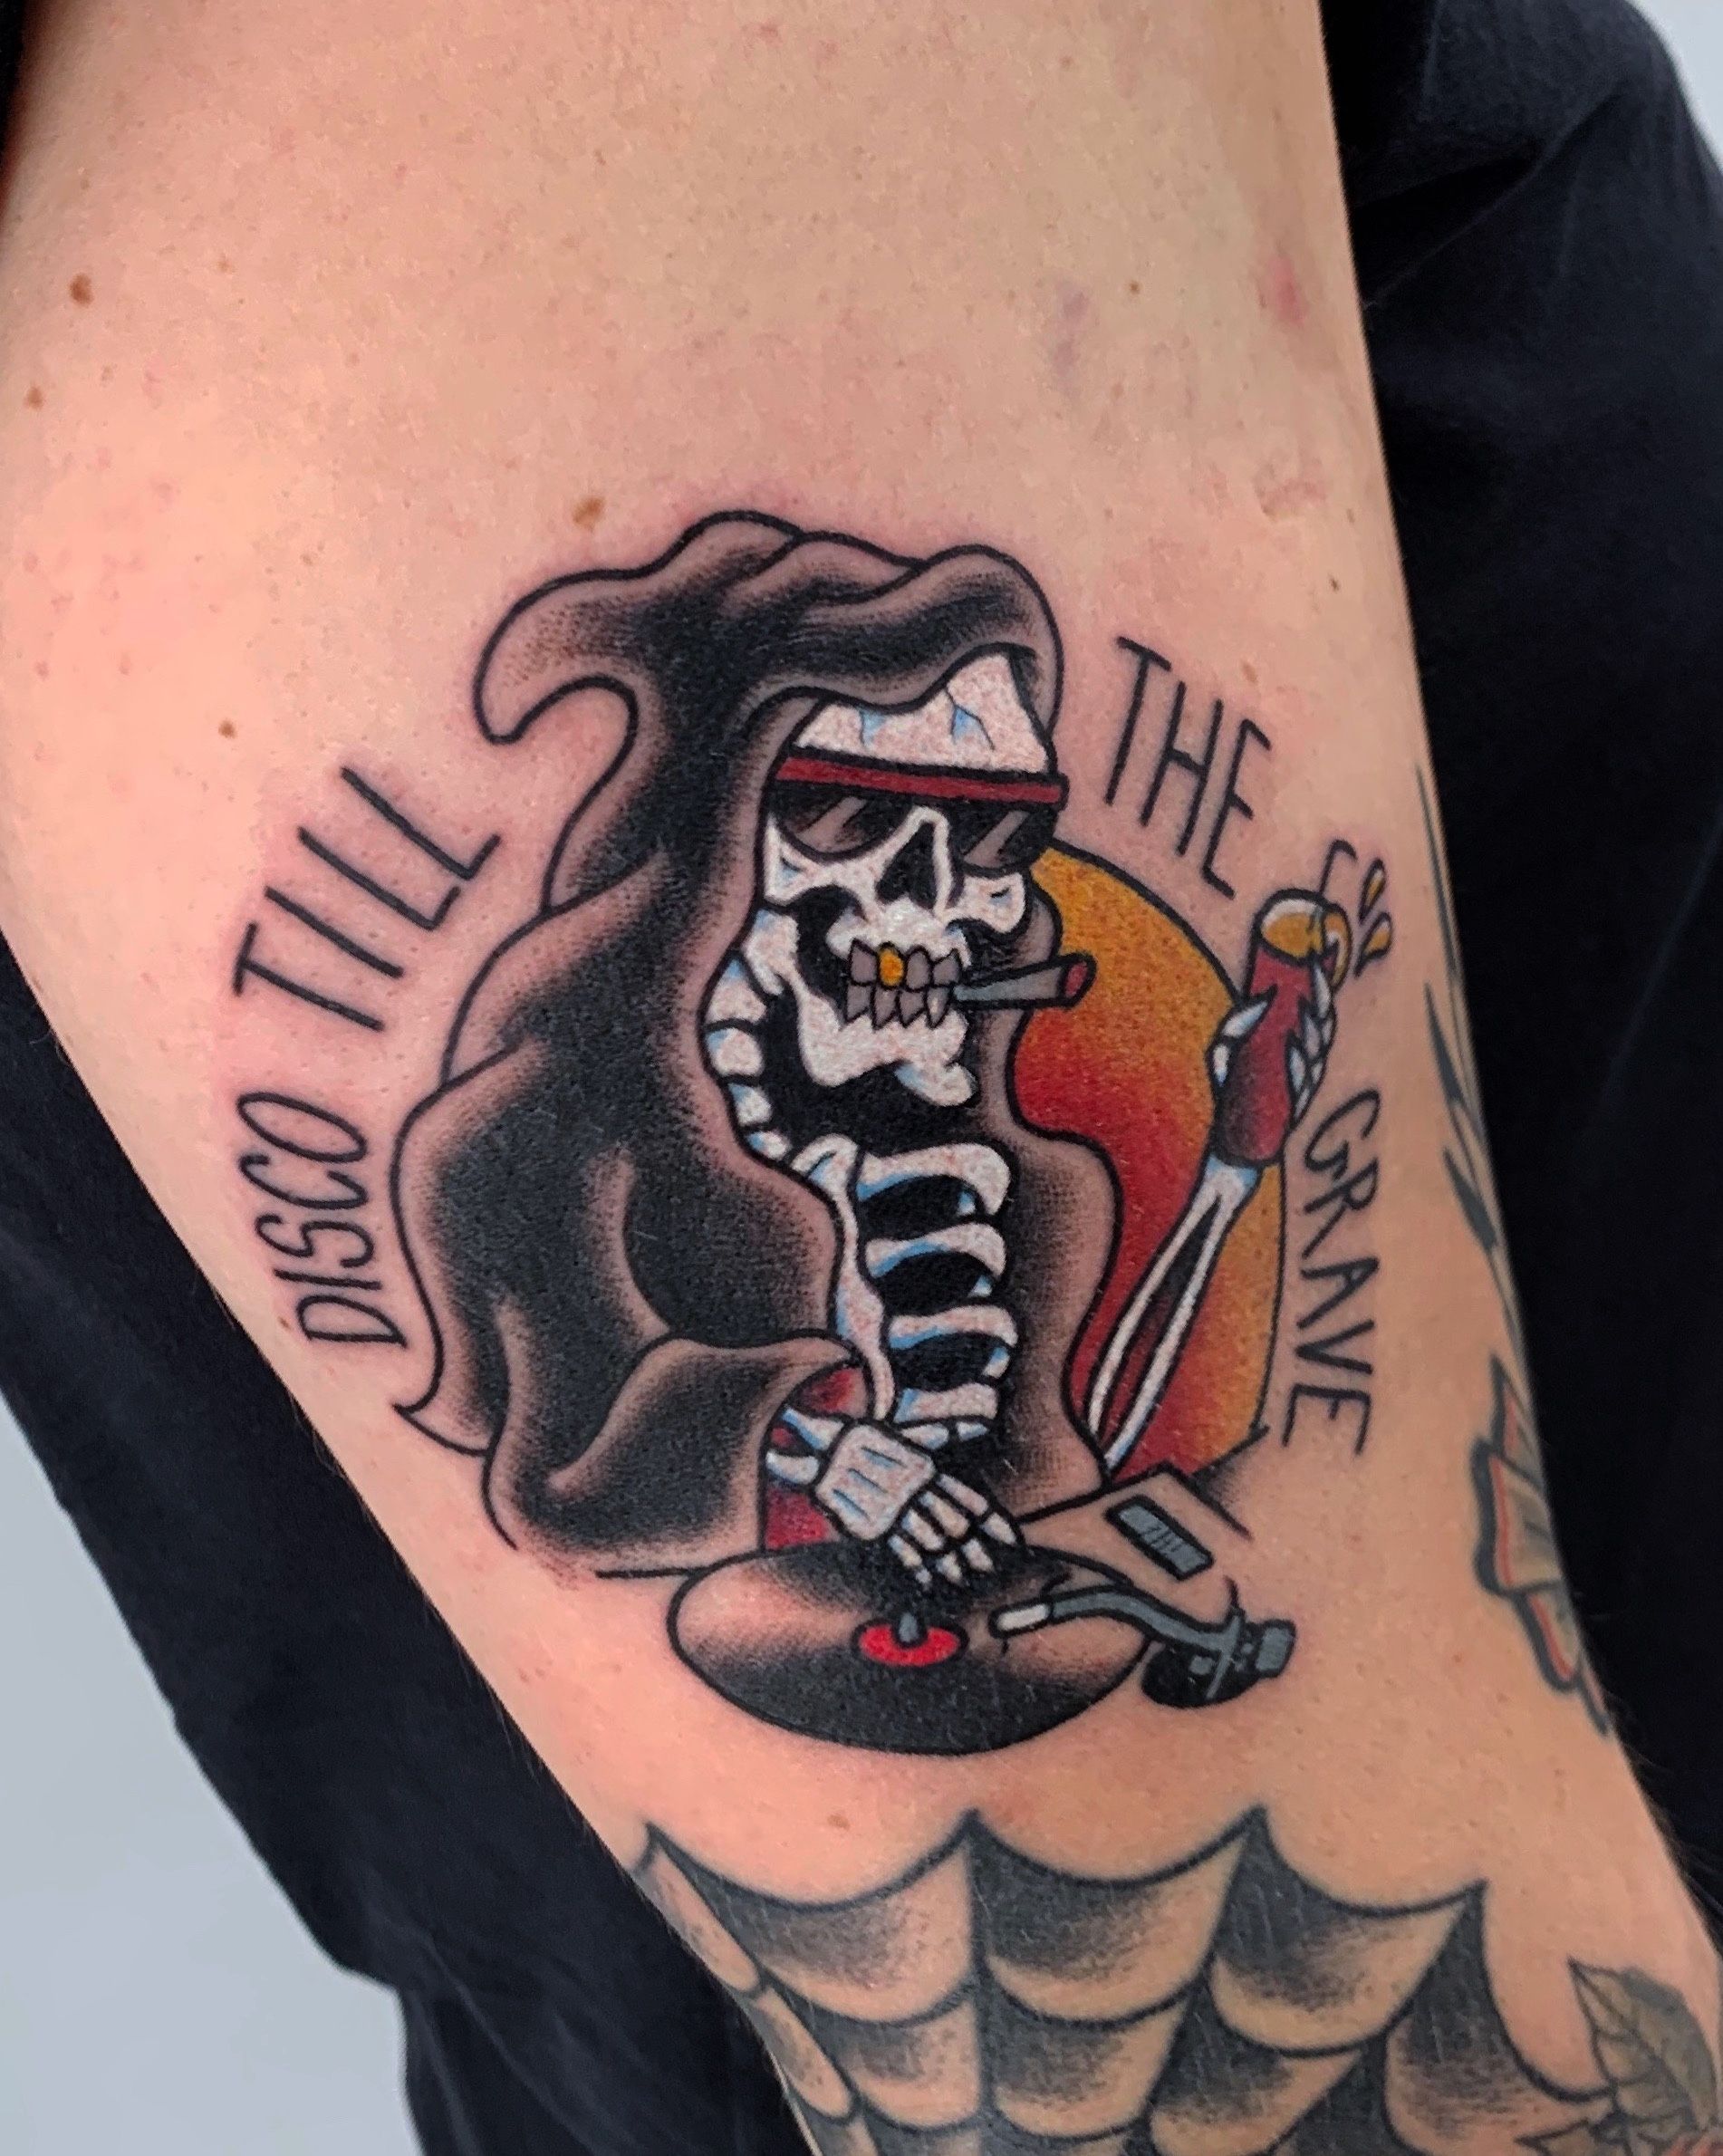 dailyhaunt is here for all... - Inkaholics Tattoo Company | Facebook